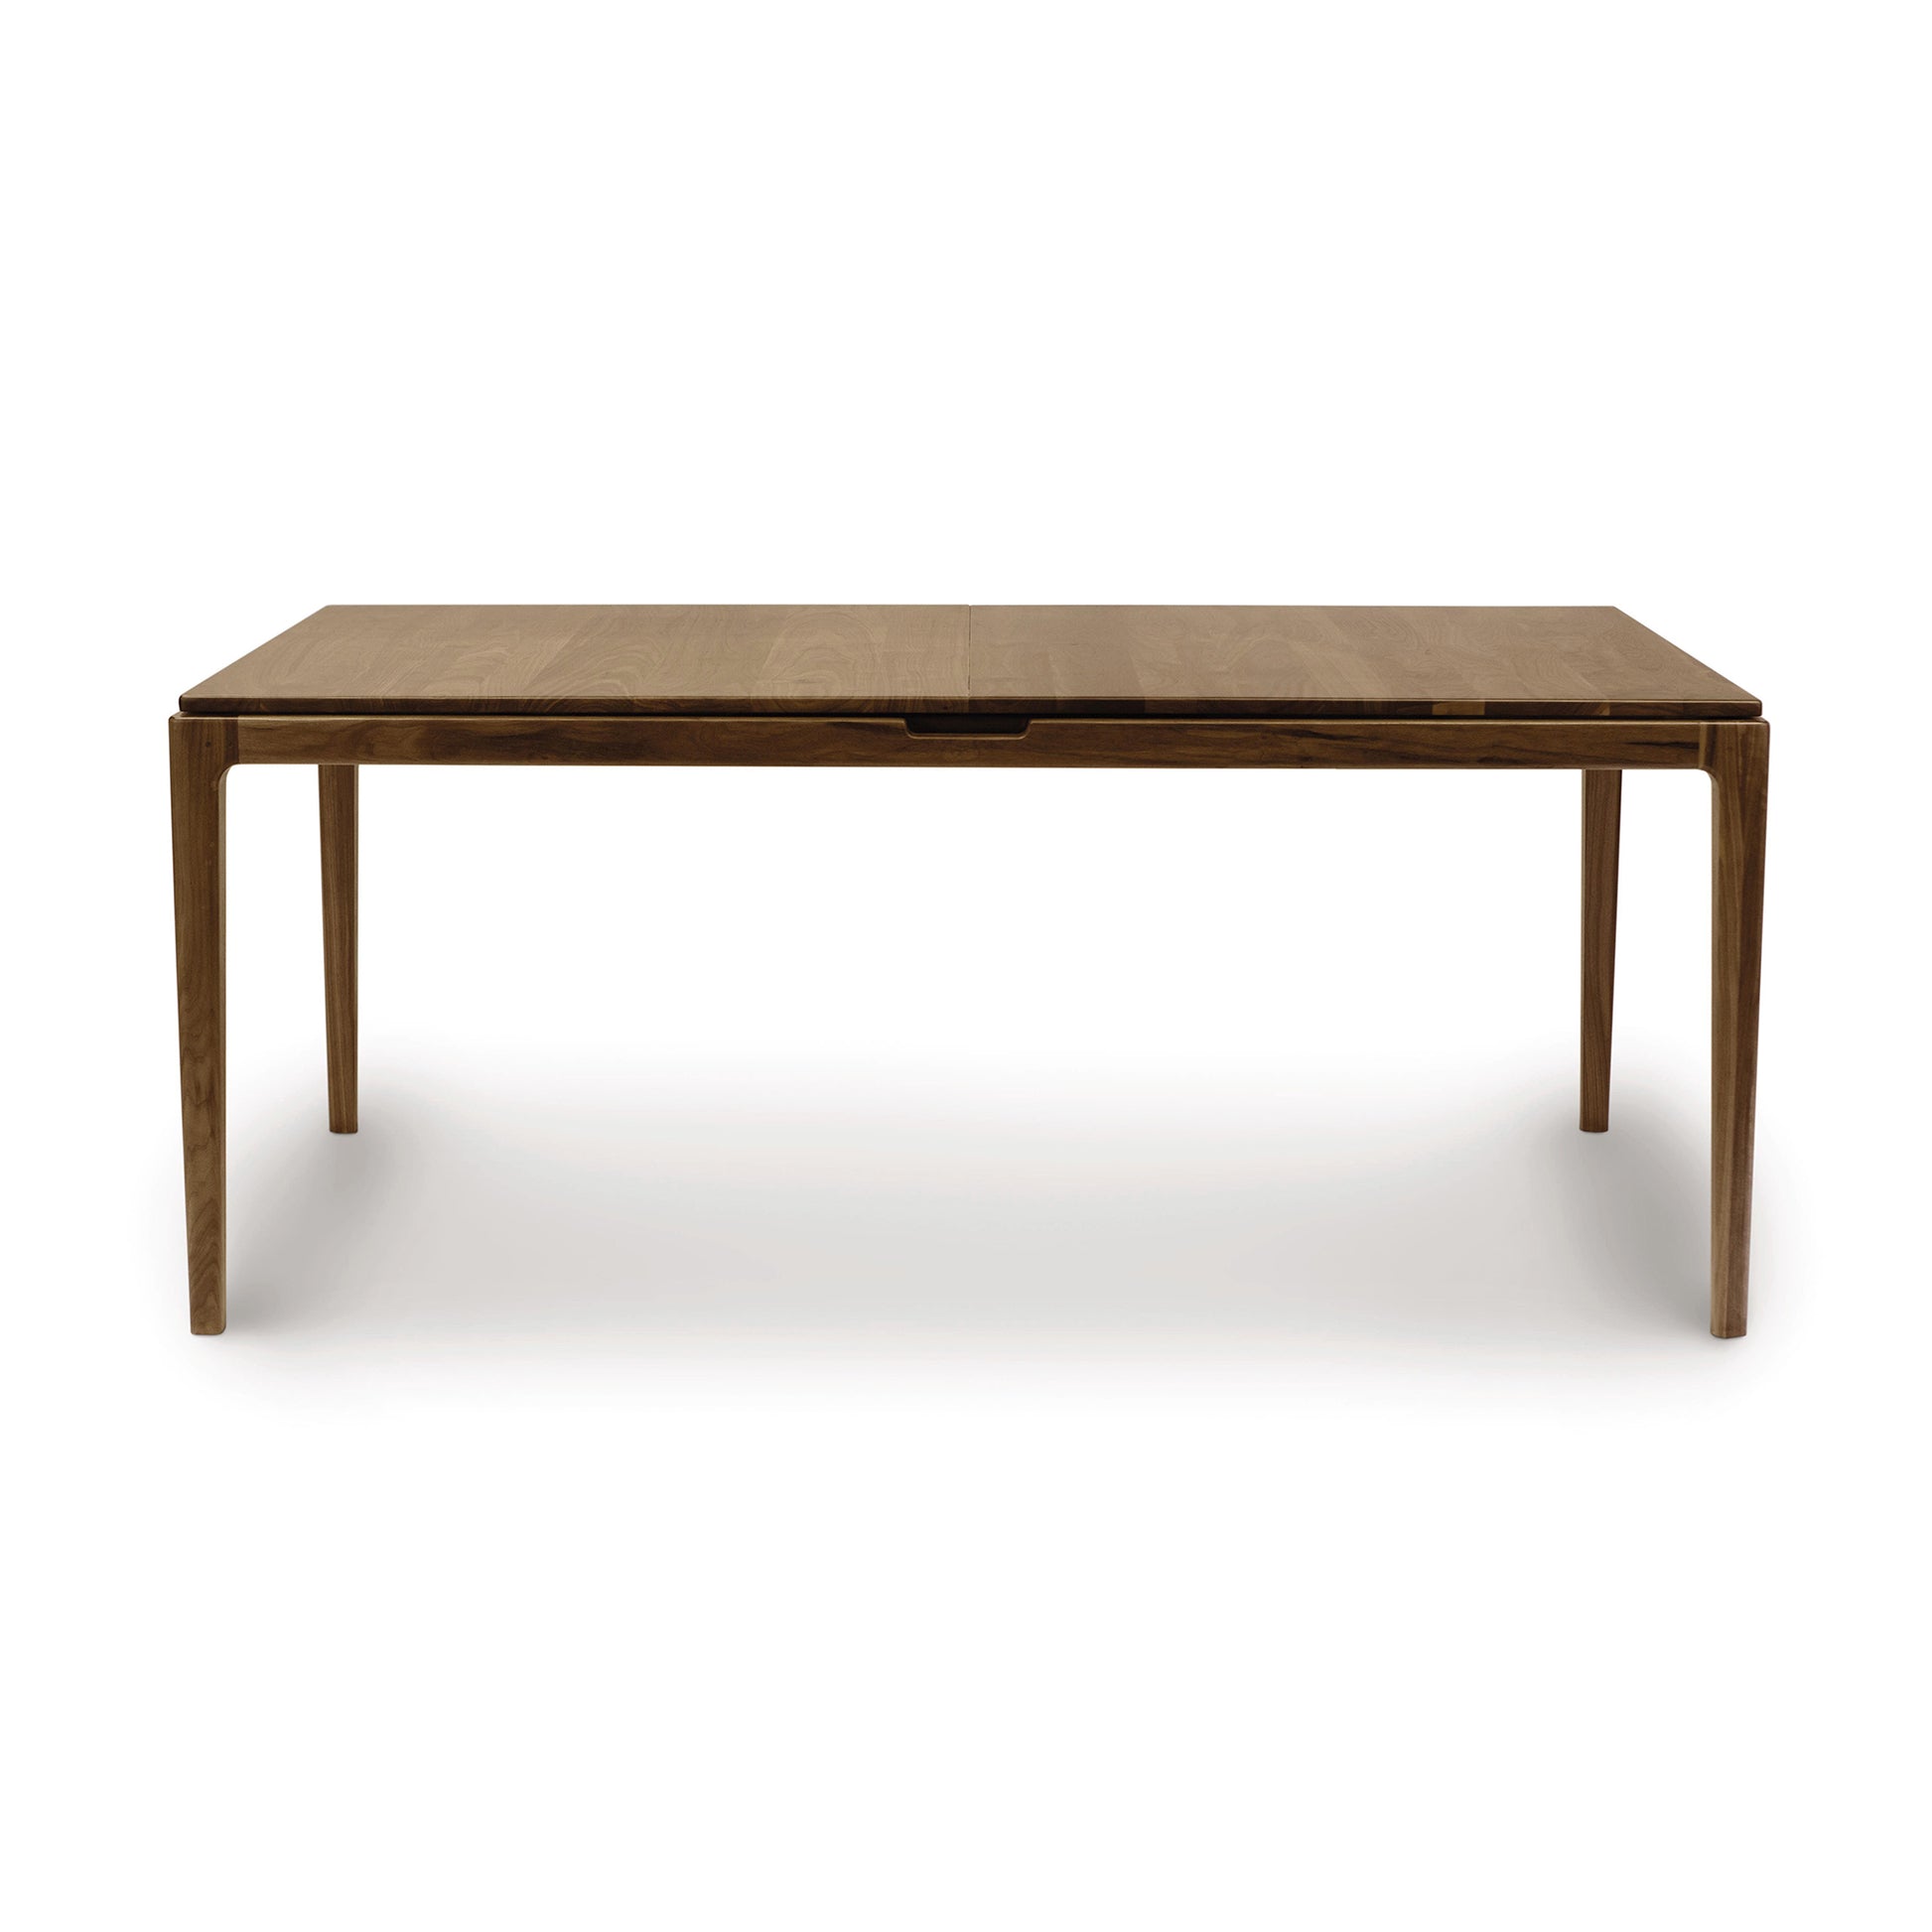 An eco-friendly Copeland Furniture Lisse Extension Dining Table isolated on a white background.